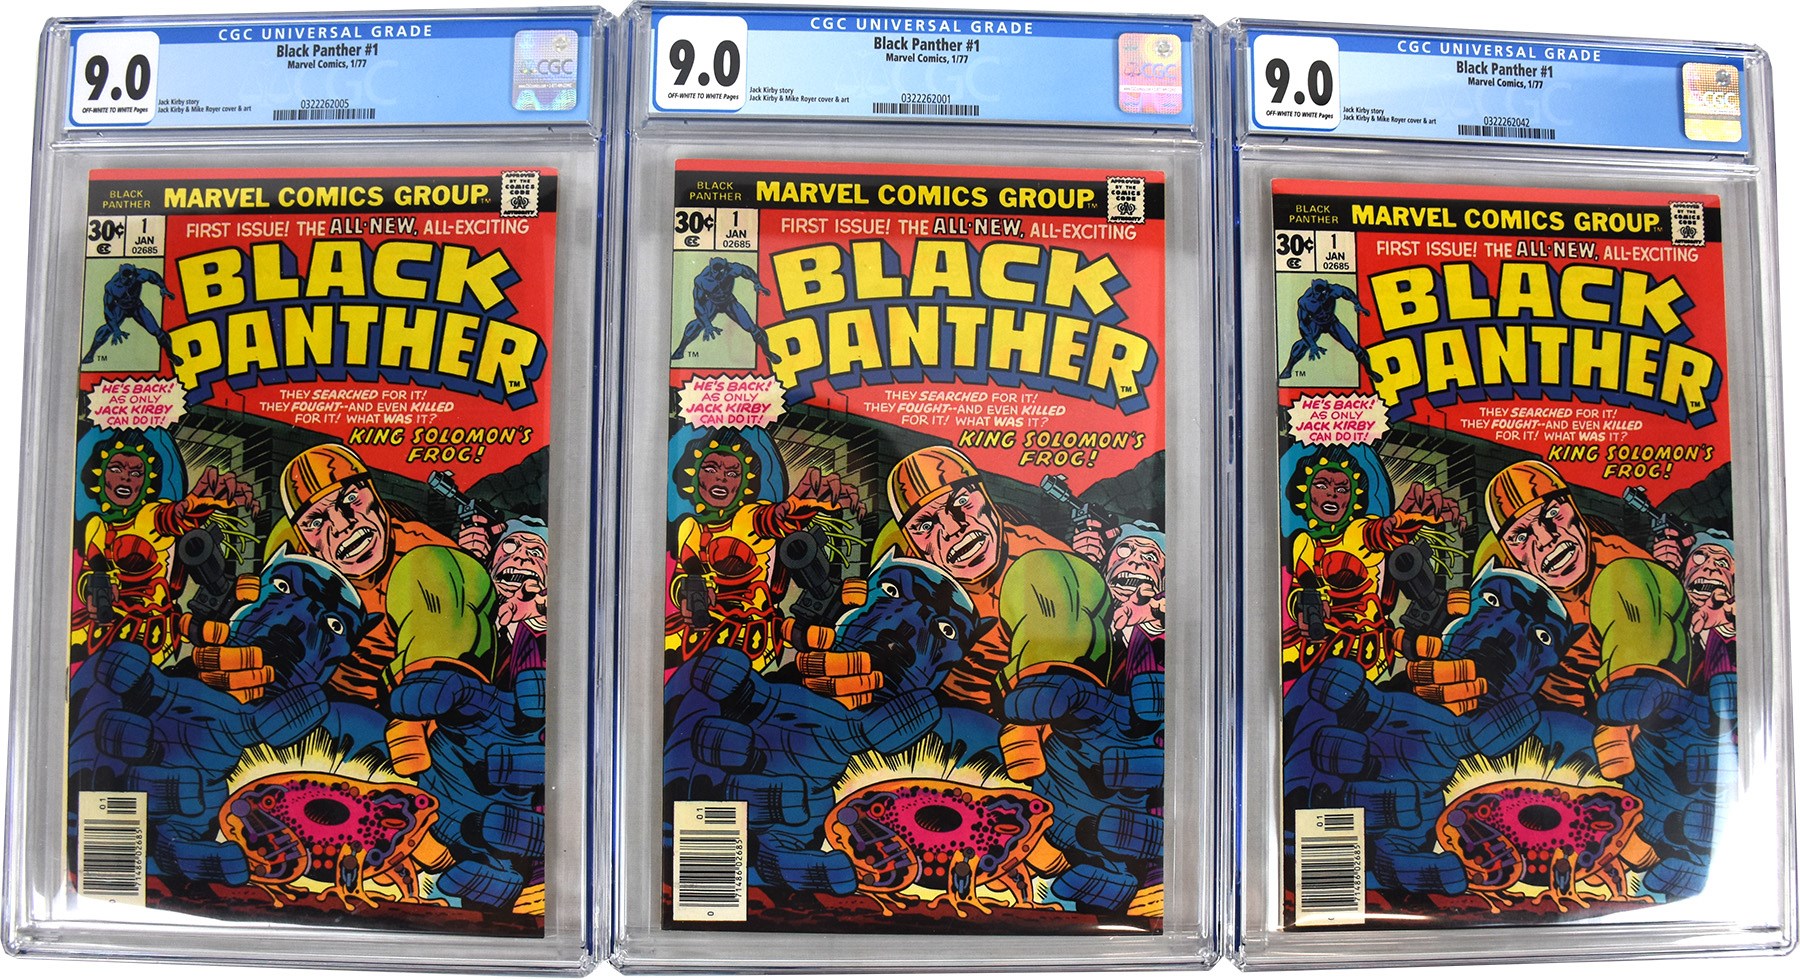 - Three Issues of Black Panther #1 - All Are CGC 9.0